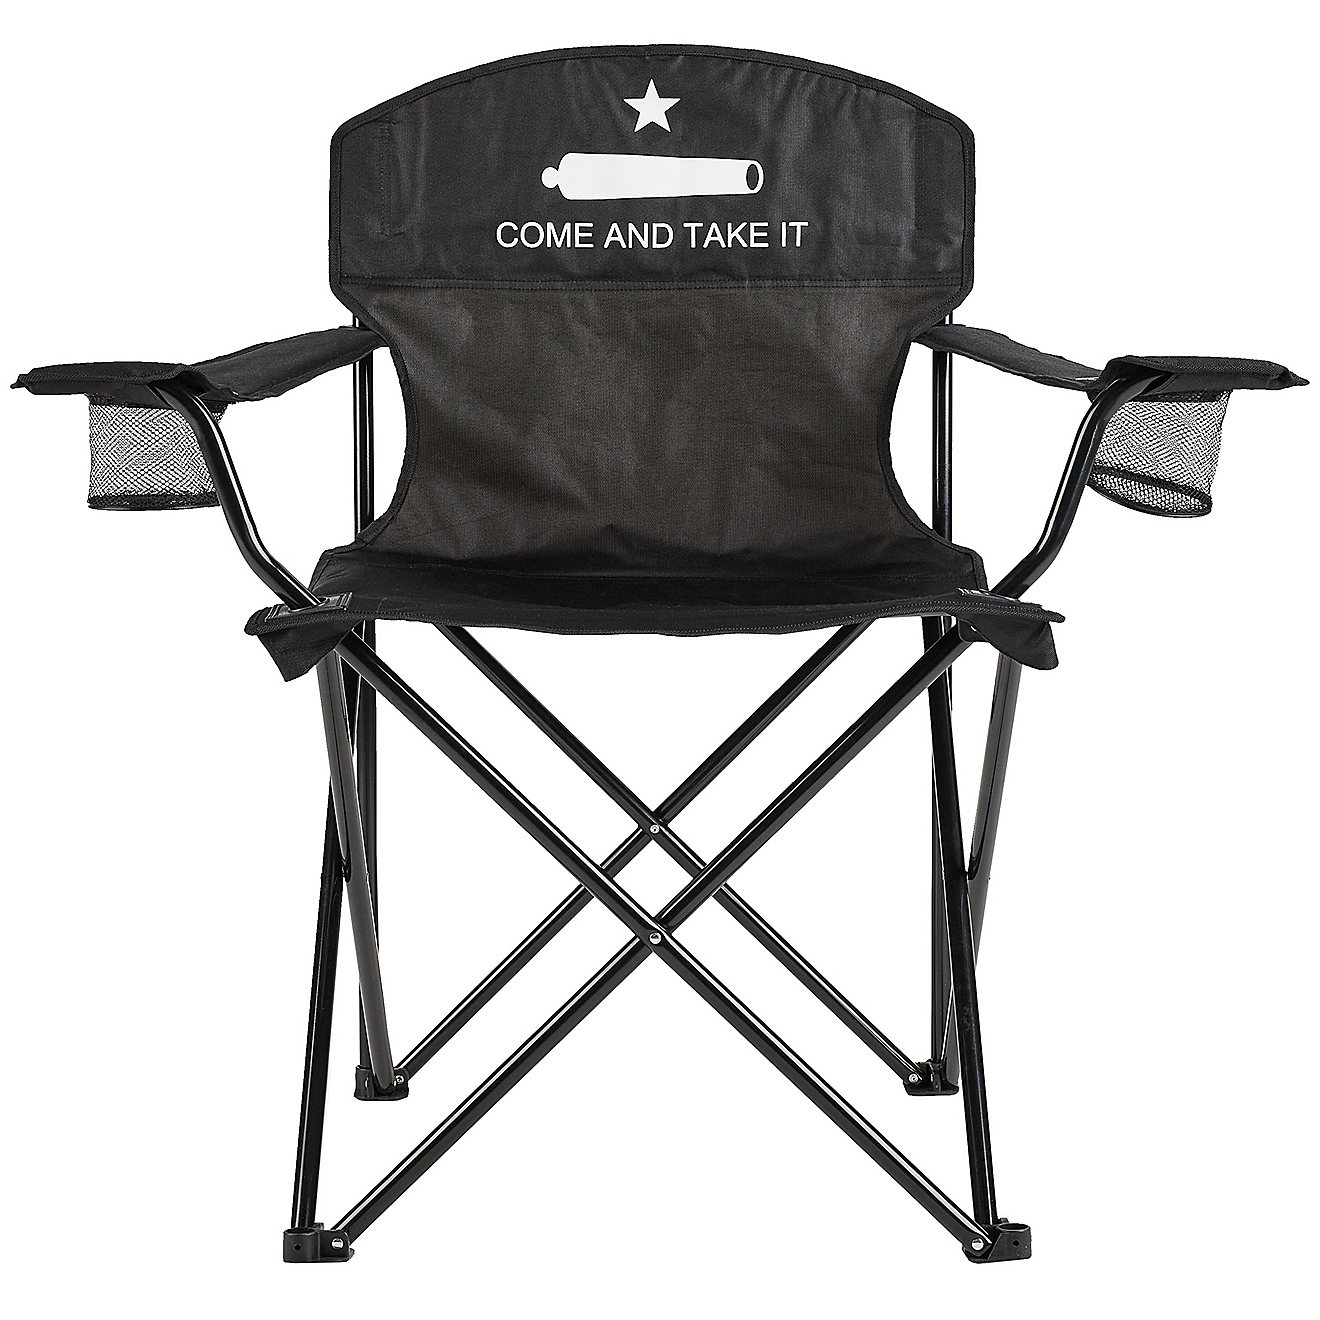 Academy Sports + Outdoors Come and Take It Folding Chair                                                                         - view number 4